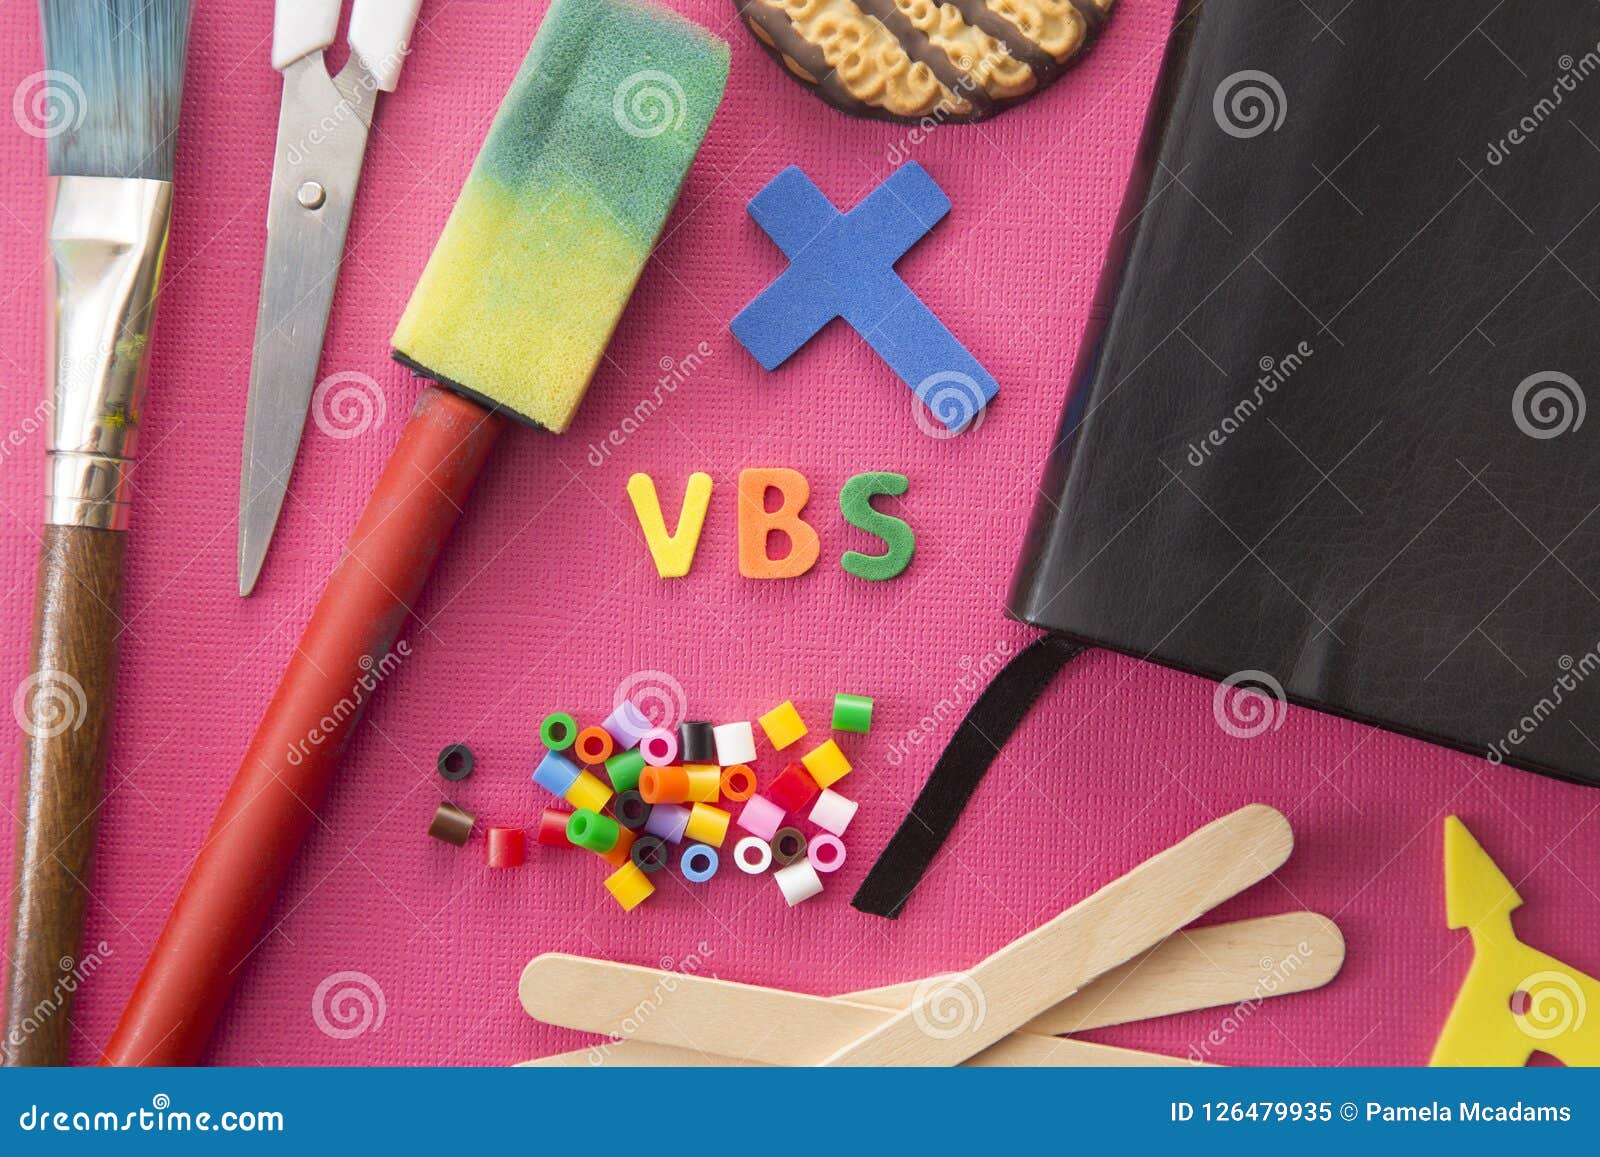 Vbs Photos Free Royalty Free Stock Photos From Dreamstime